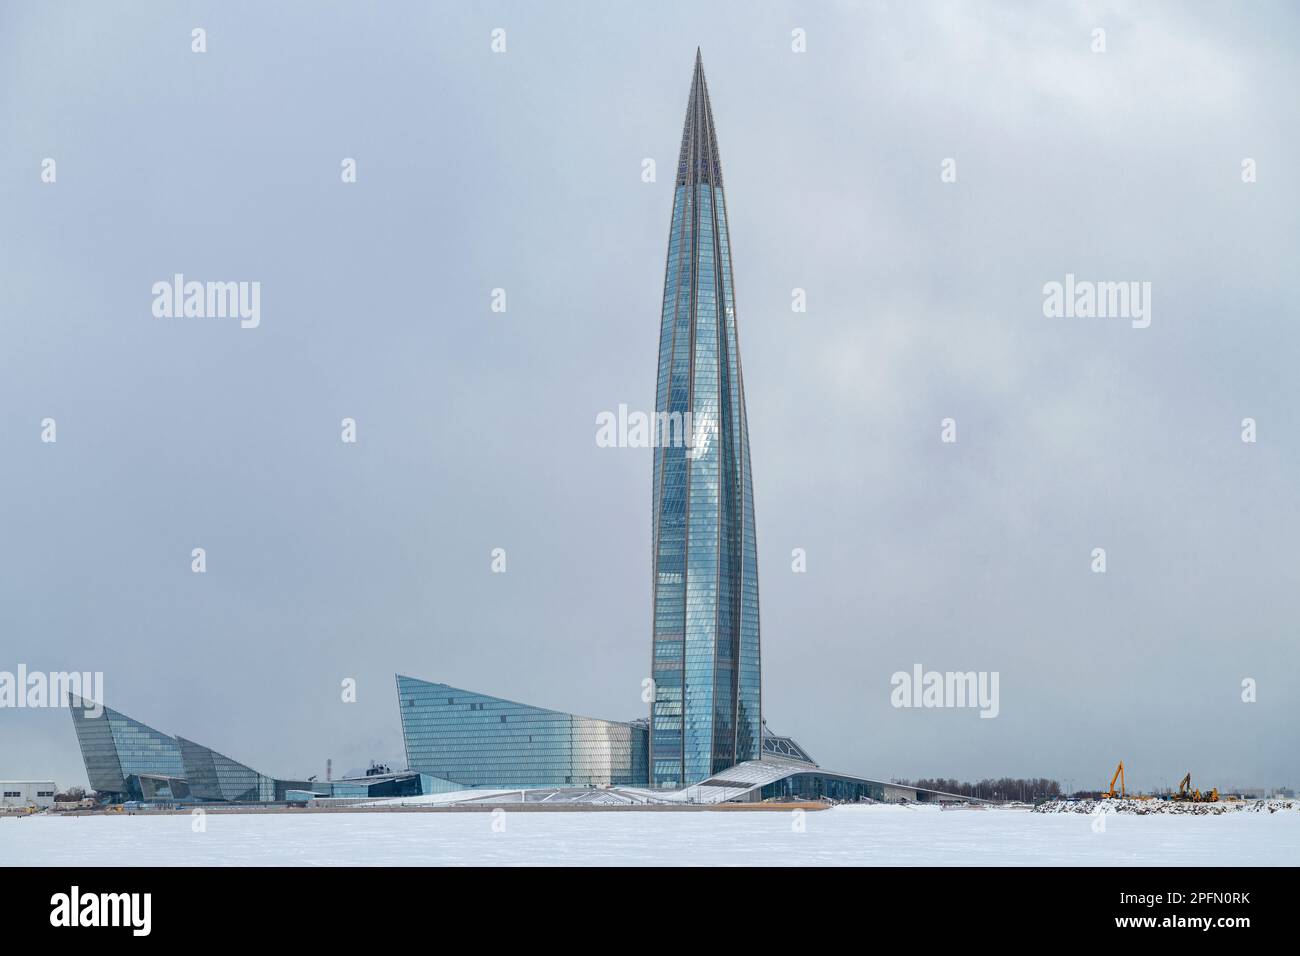 SAINT PETERSBURG, RUSSIA - MARCH 13, 2023: View of the Lakhta Center high-rise building from the Gulf of Finland on a cloudy March day Stock Photo